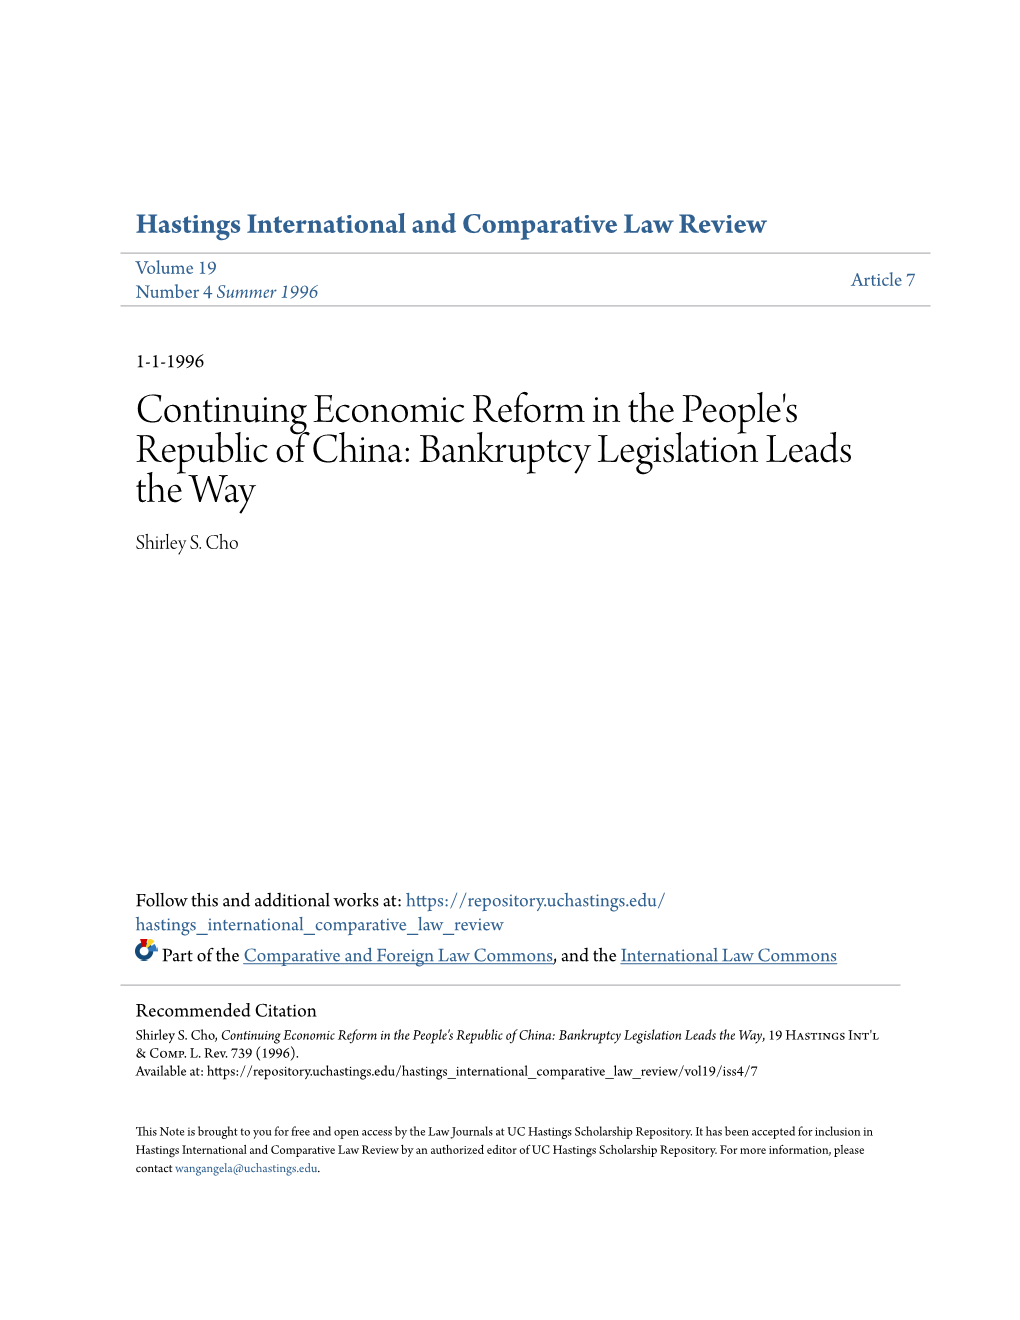 Continuing Economic Reform in the People's Republic of China: Bankruptcy Legislation Leads the Way Shirley S